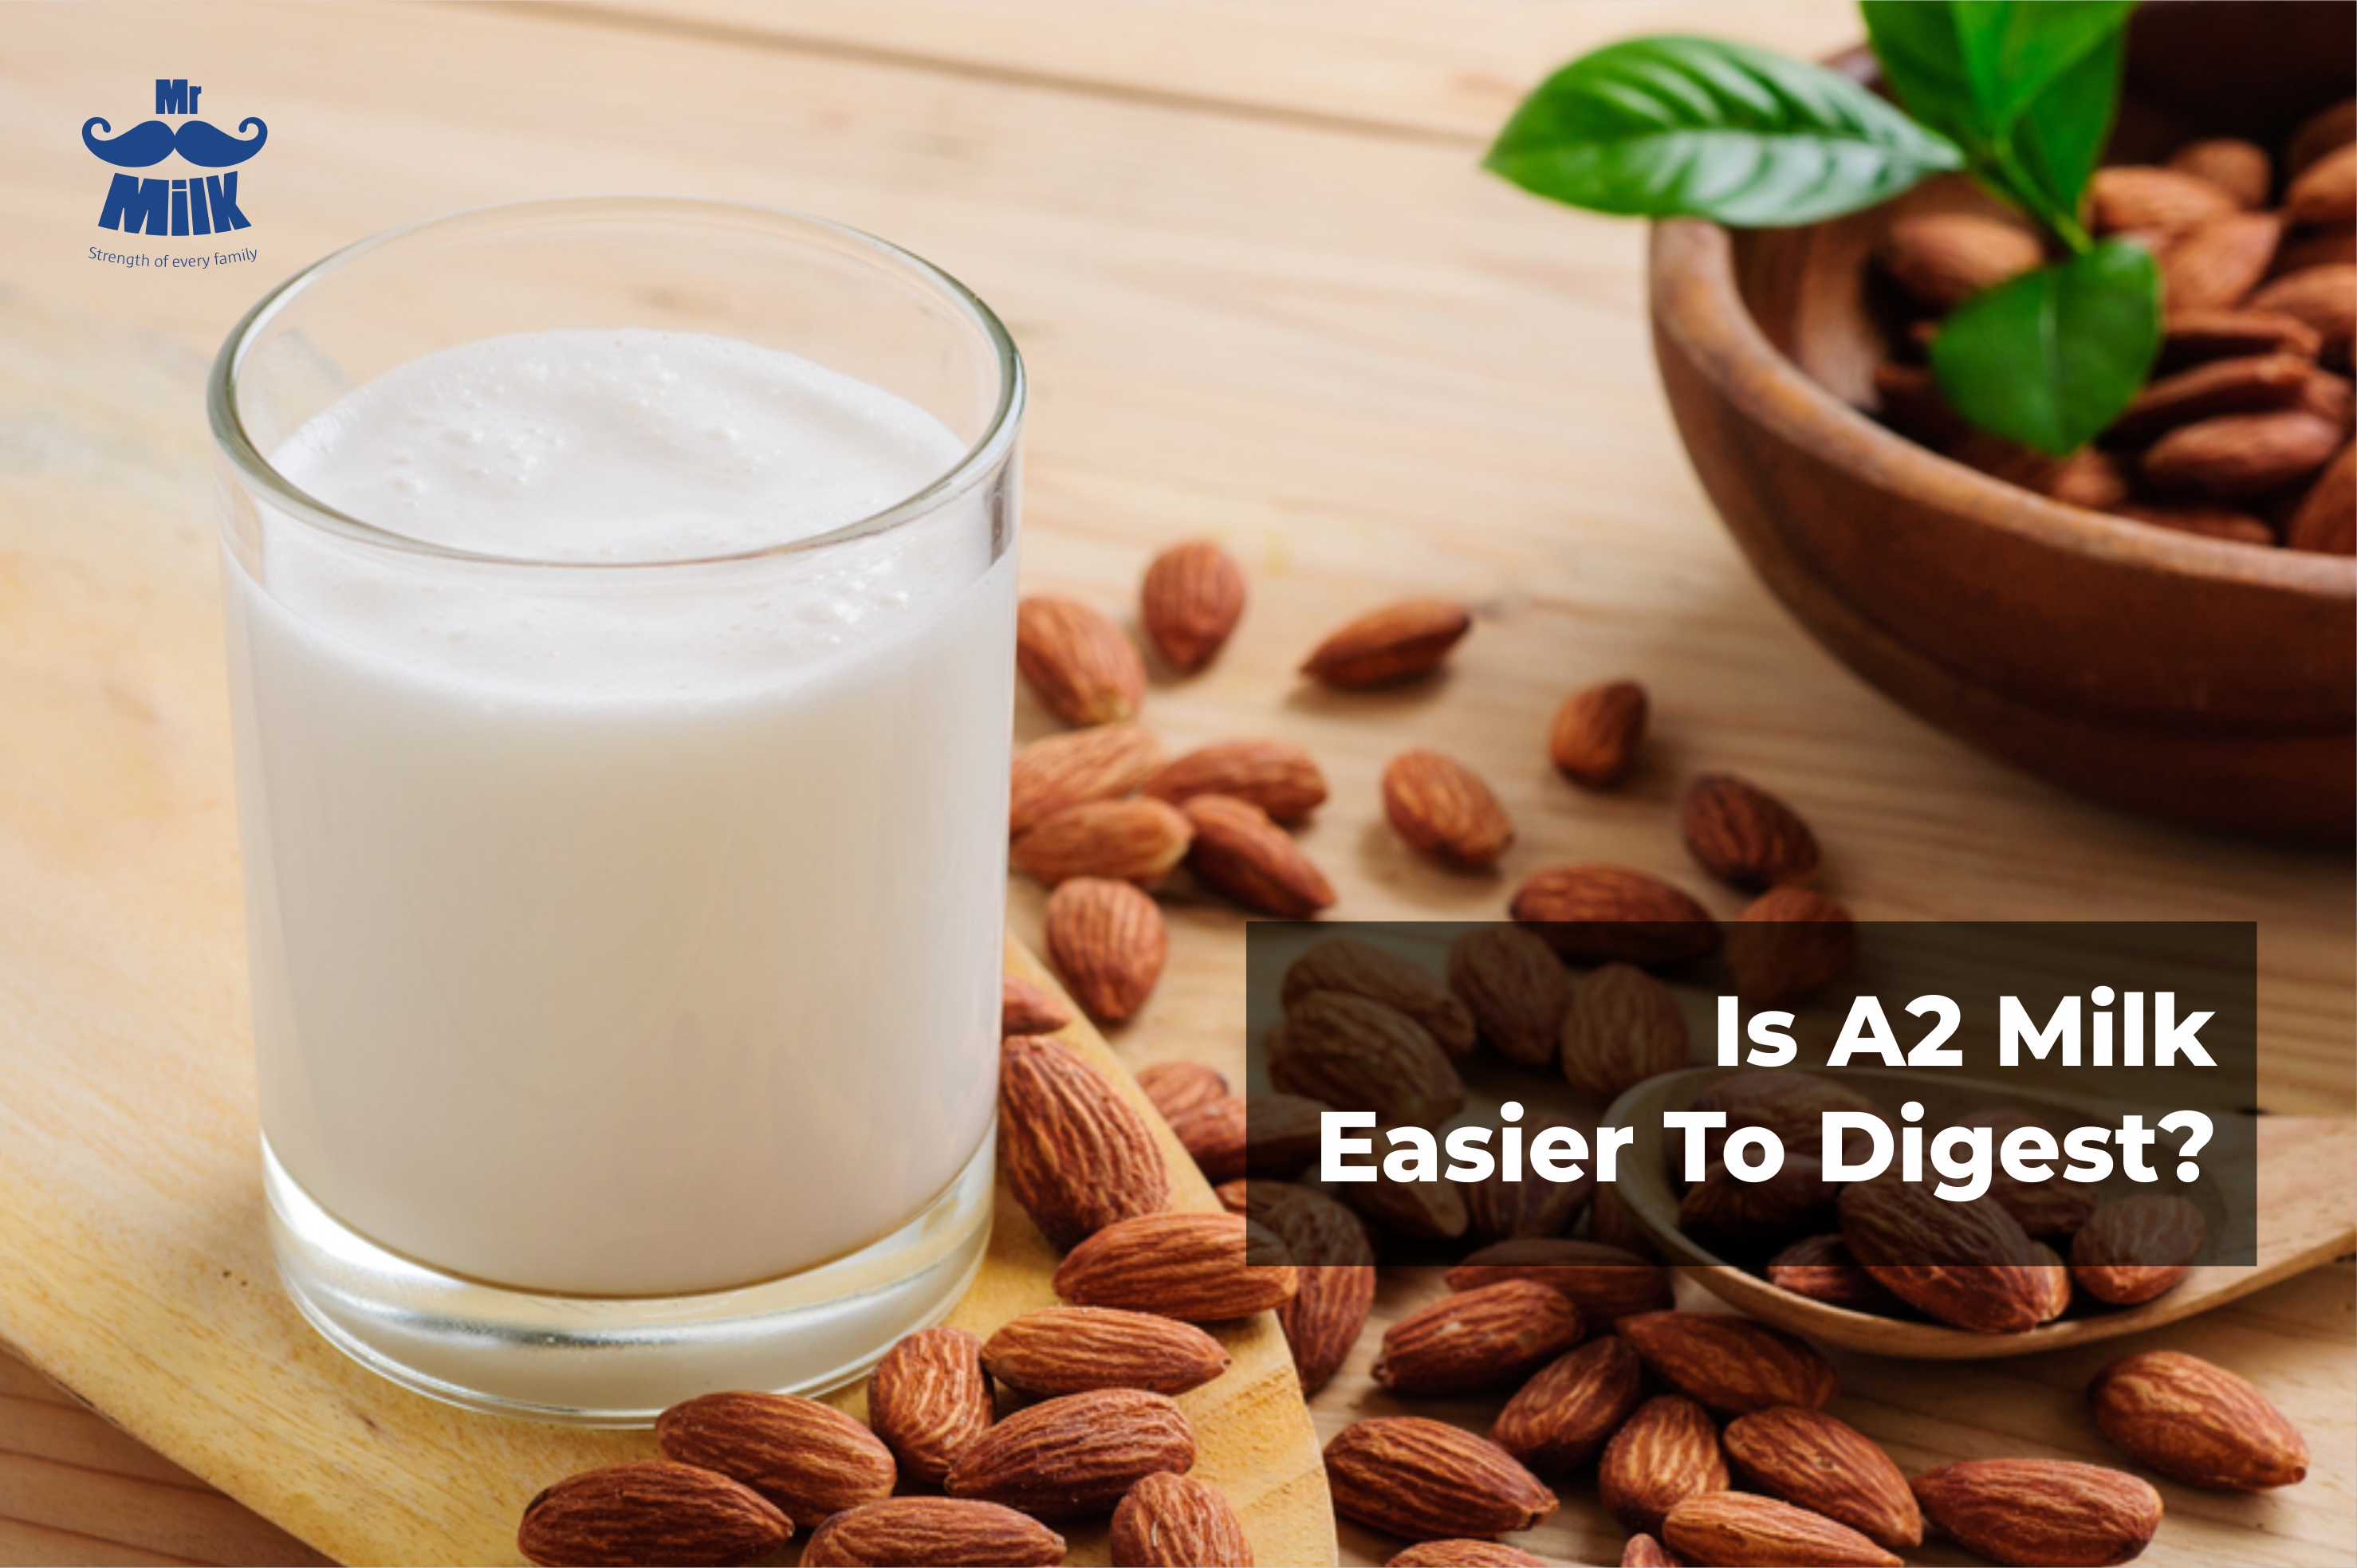 Is A2 Milk Easier To Digest?